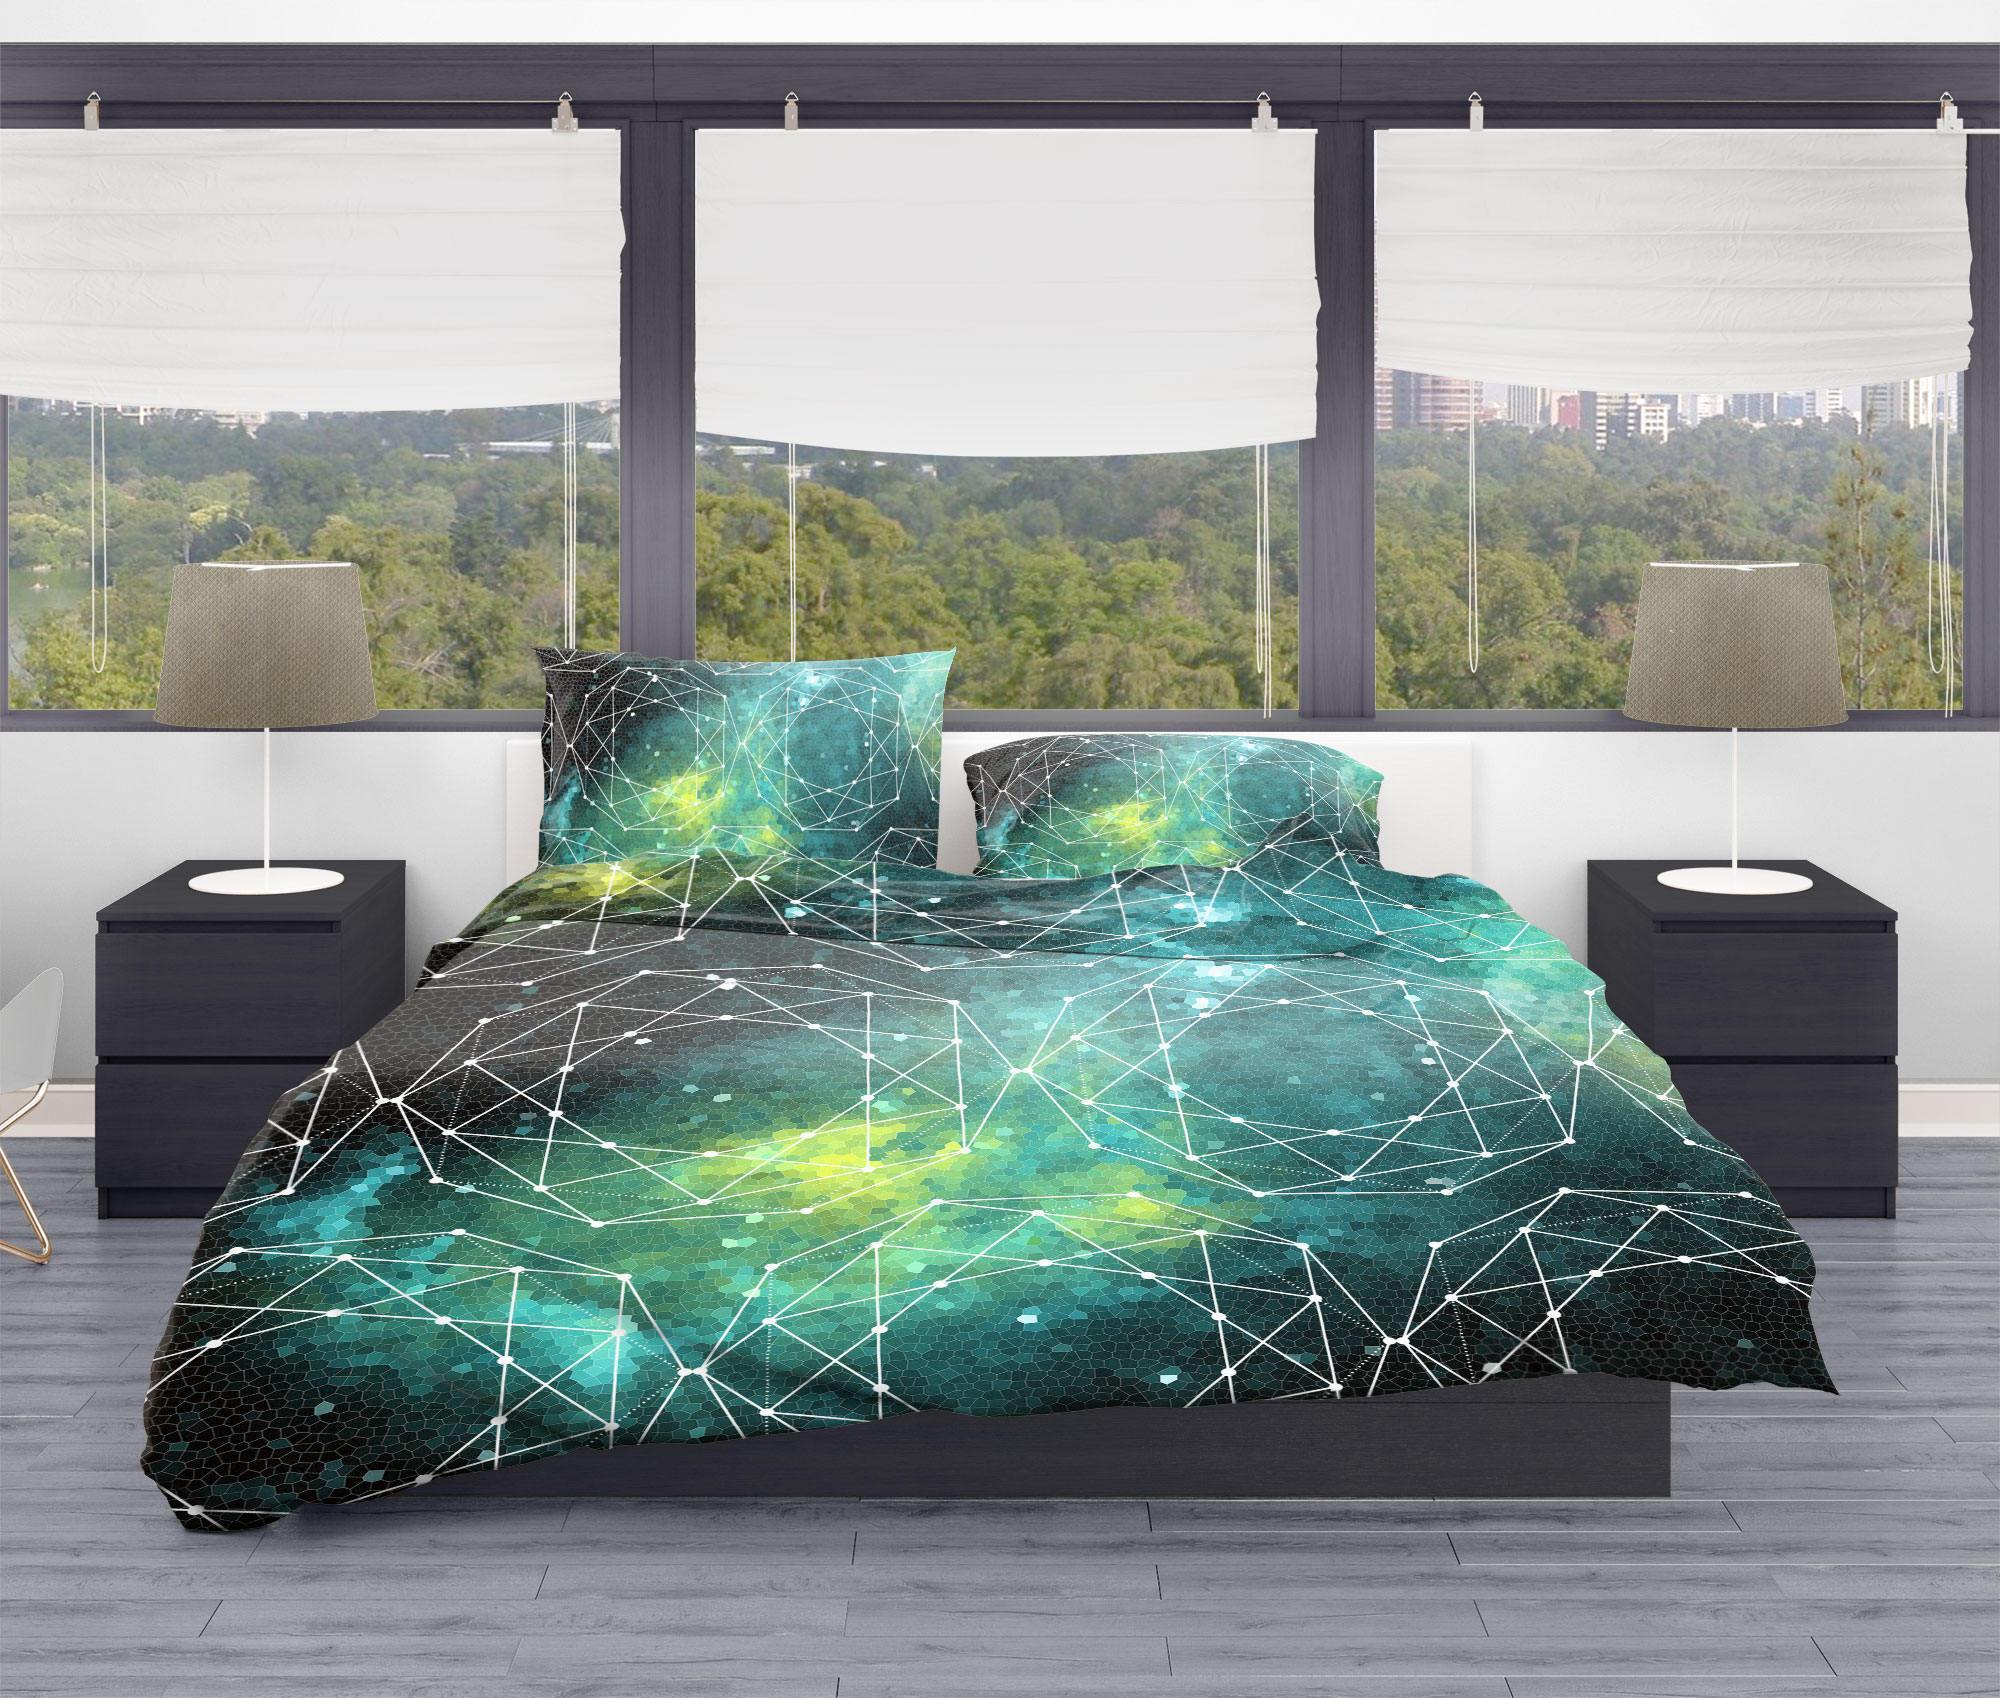 Outer Space Geometric Duvet Cover Set - Twin, Queen, King Lost in Nature